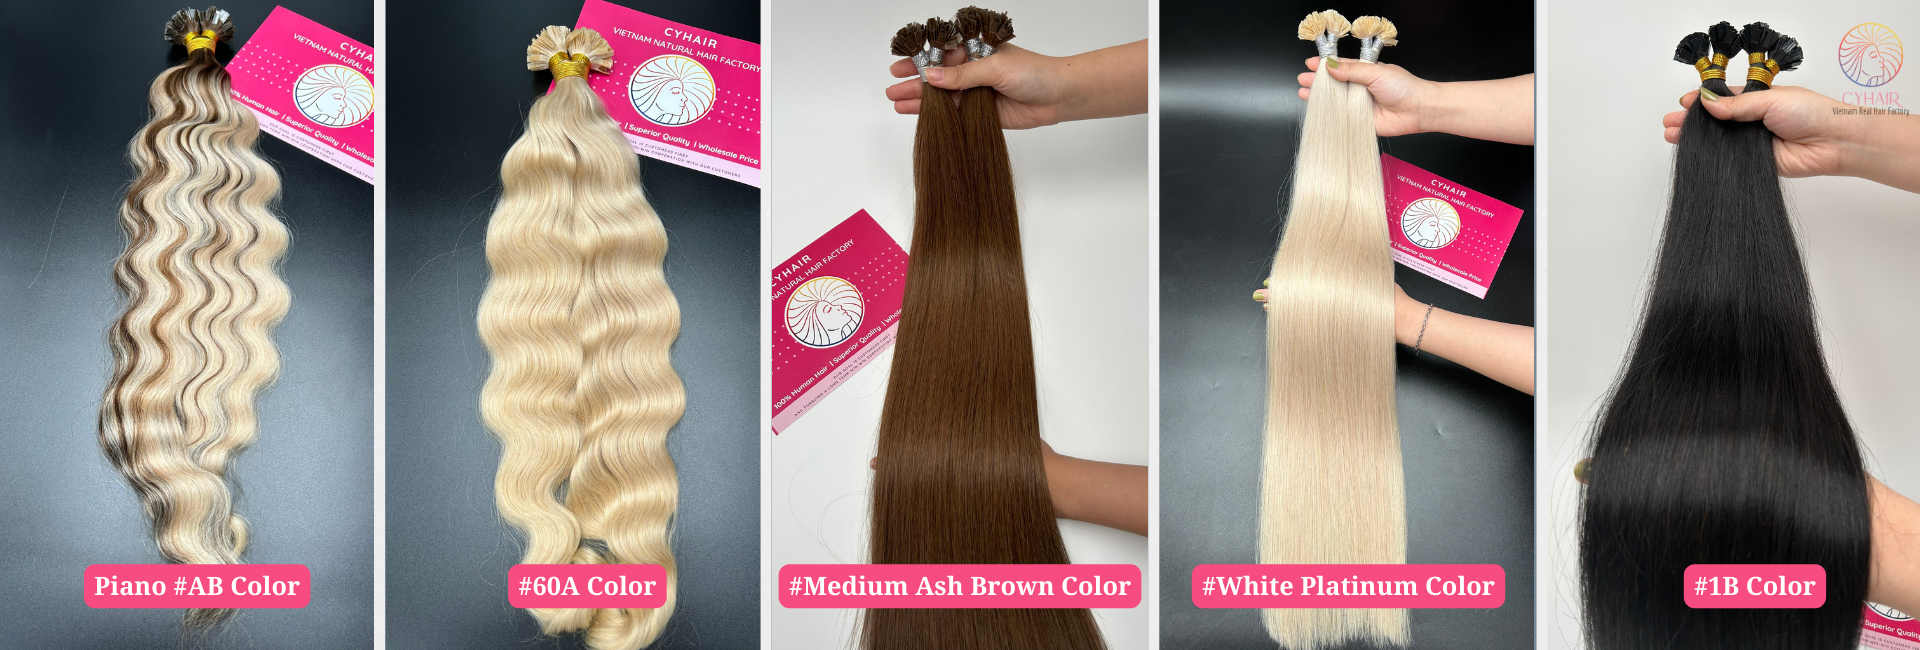 Flat Tip Hair Extensions Pros And Cons - Top-trending color for flat tip hair extensions of CYhair